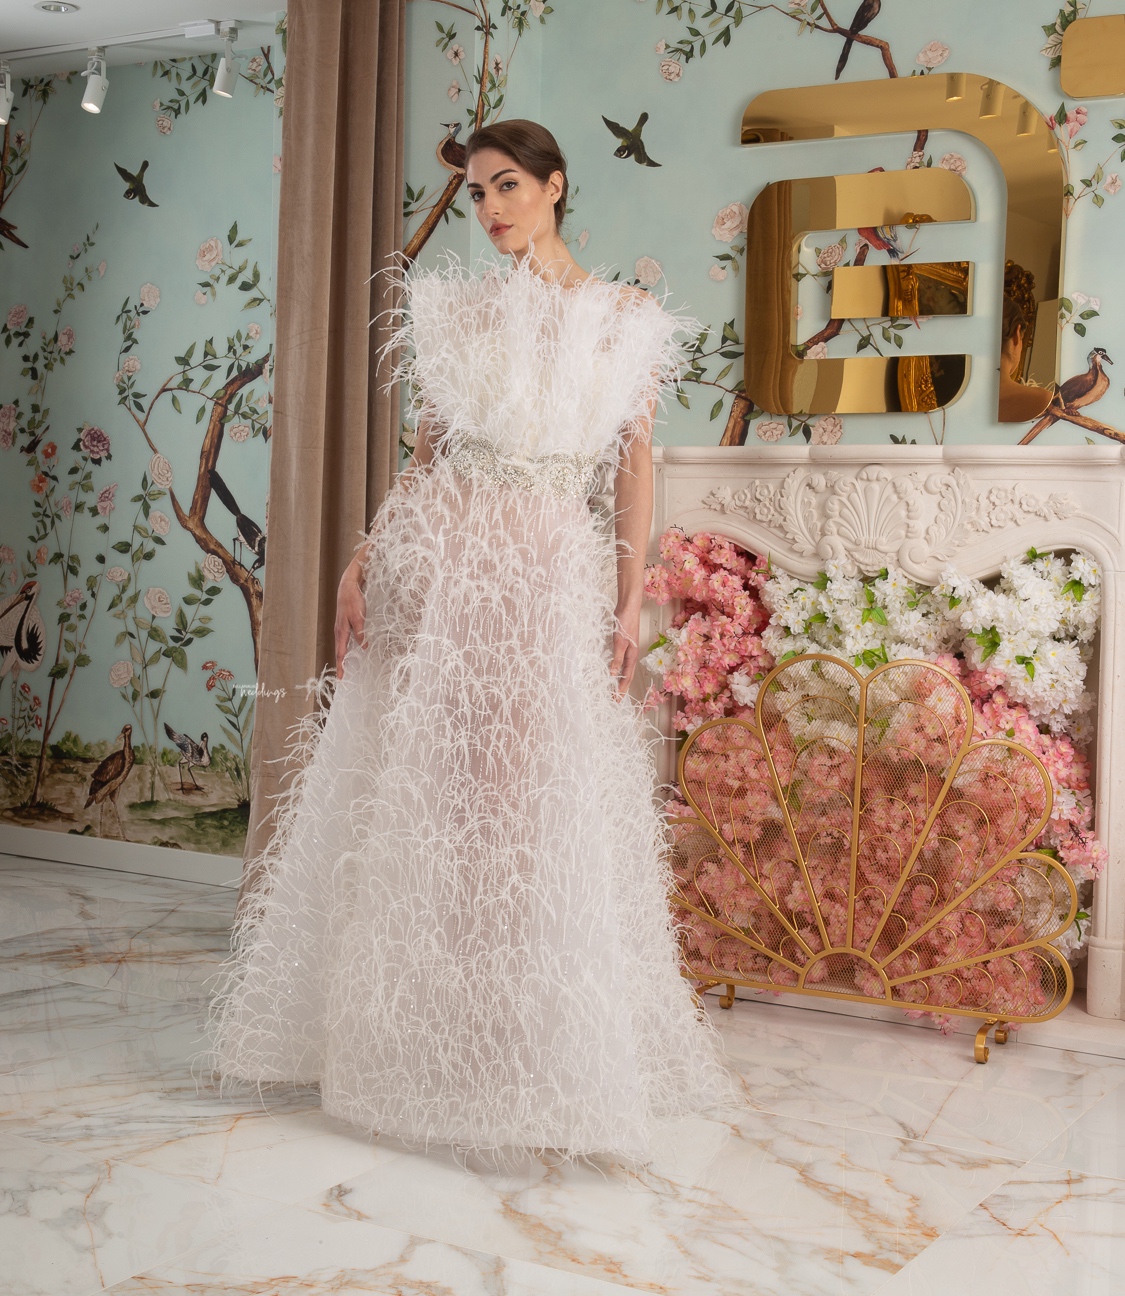 The Essence Assortment by Esé Azénabor Highlights Uniqueness & Innovation in Bridal Vogue